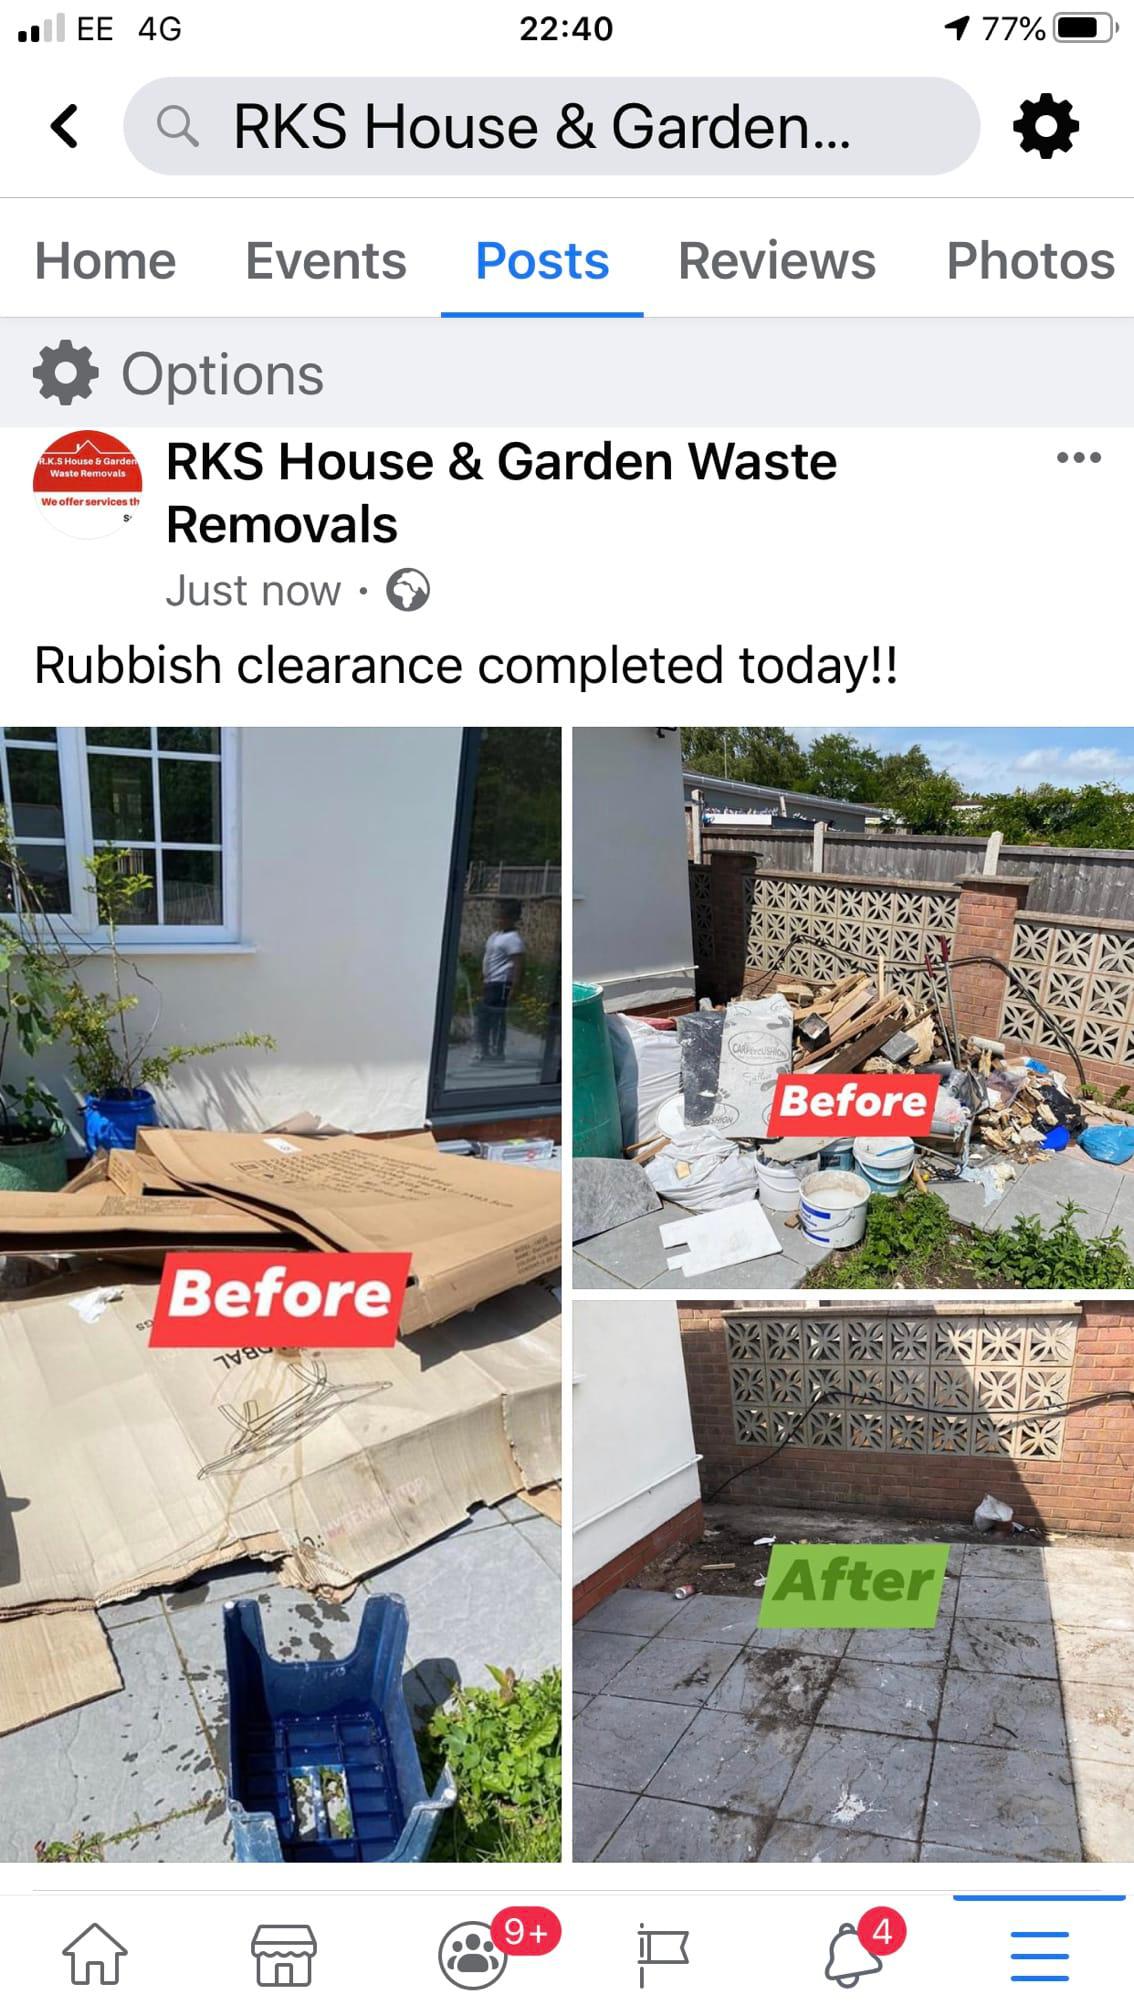 Images R.K.S House & Garden Waste Removals